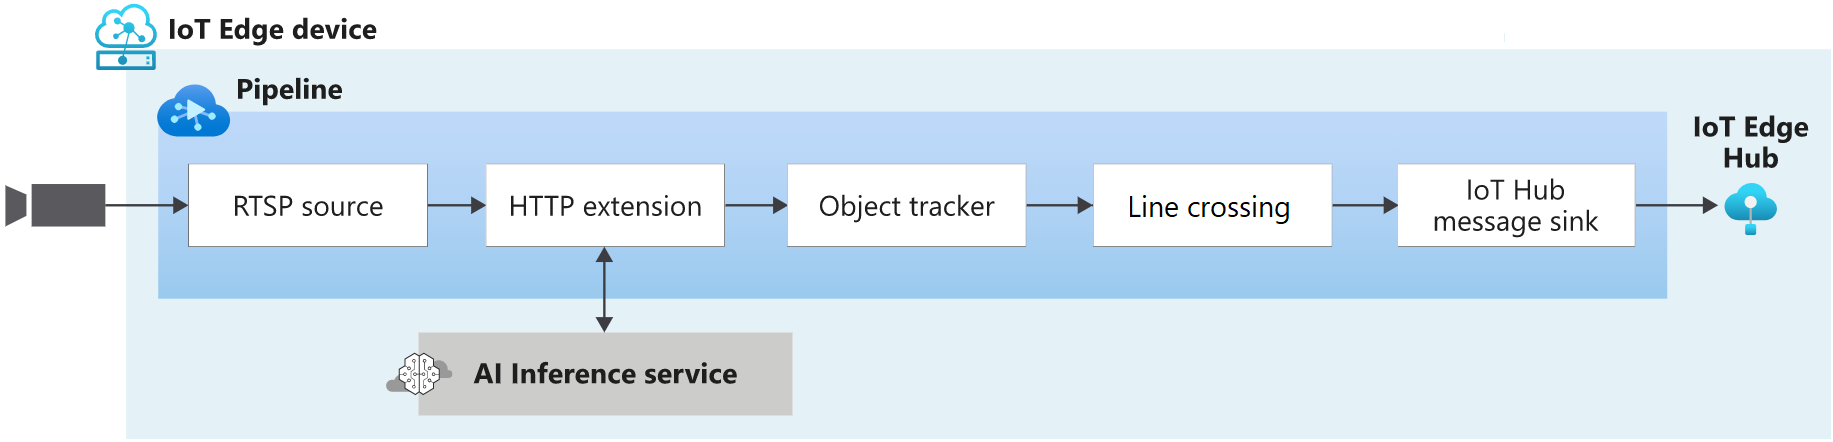 Detect when objects cross a virtual line in live video.